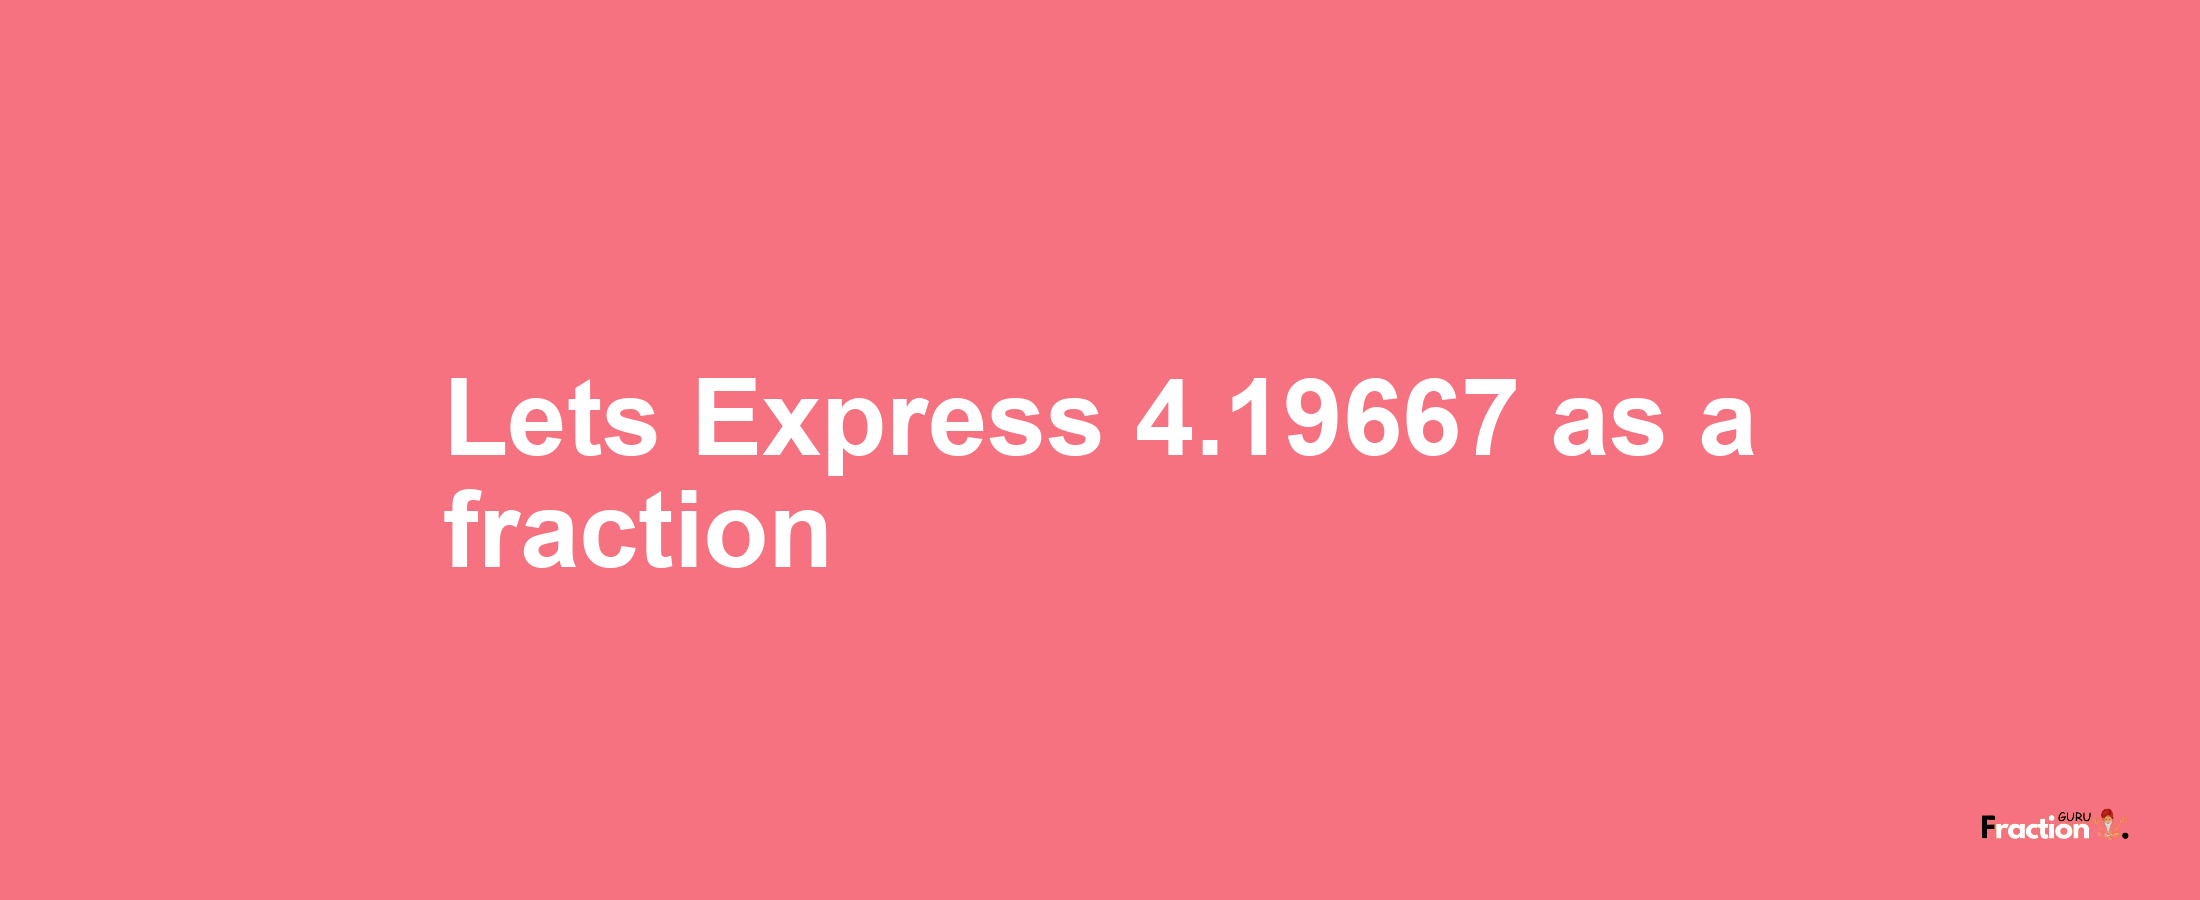 Lets Express 4.19667 as afraction